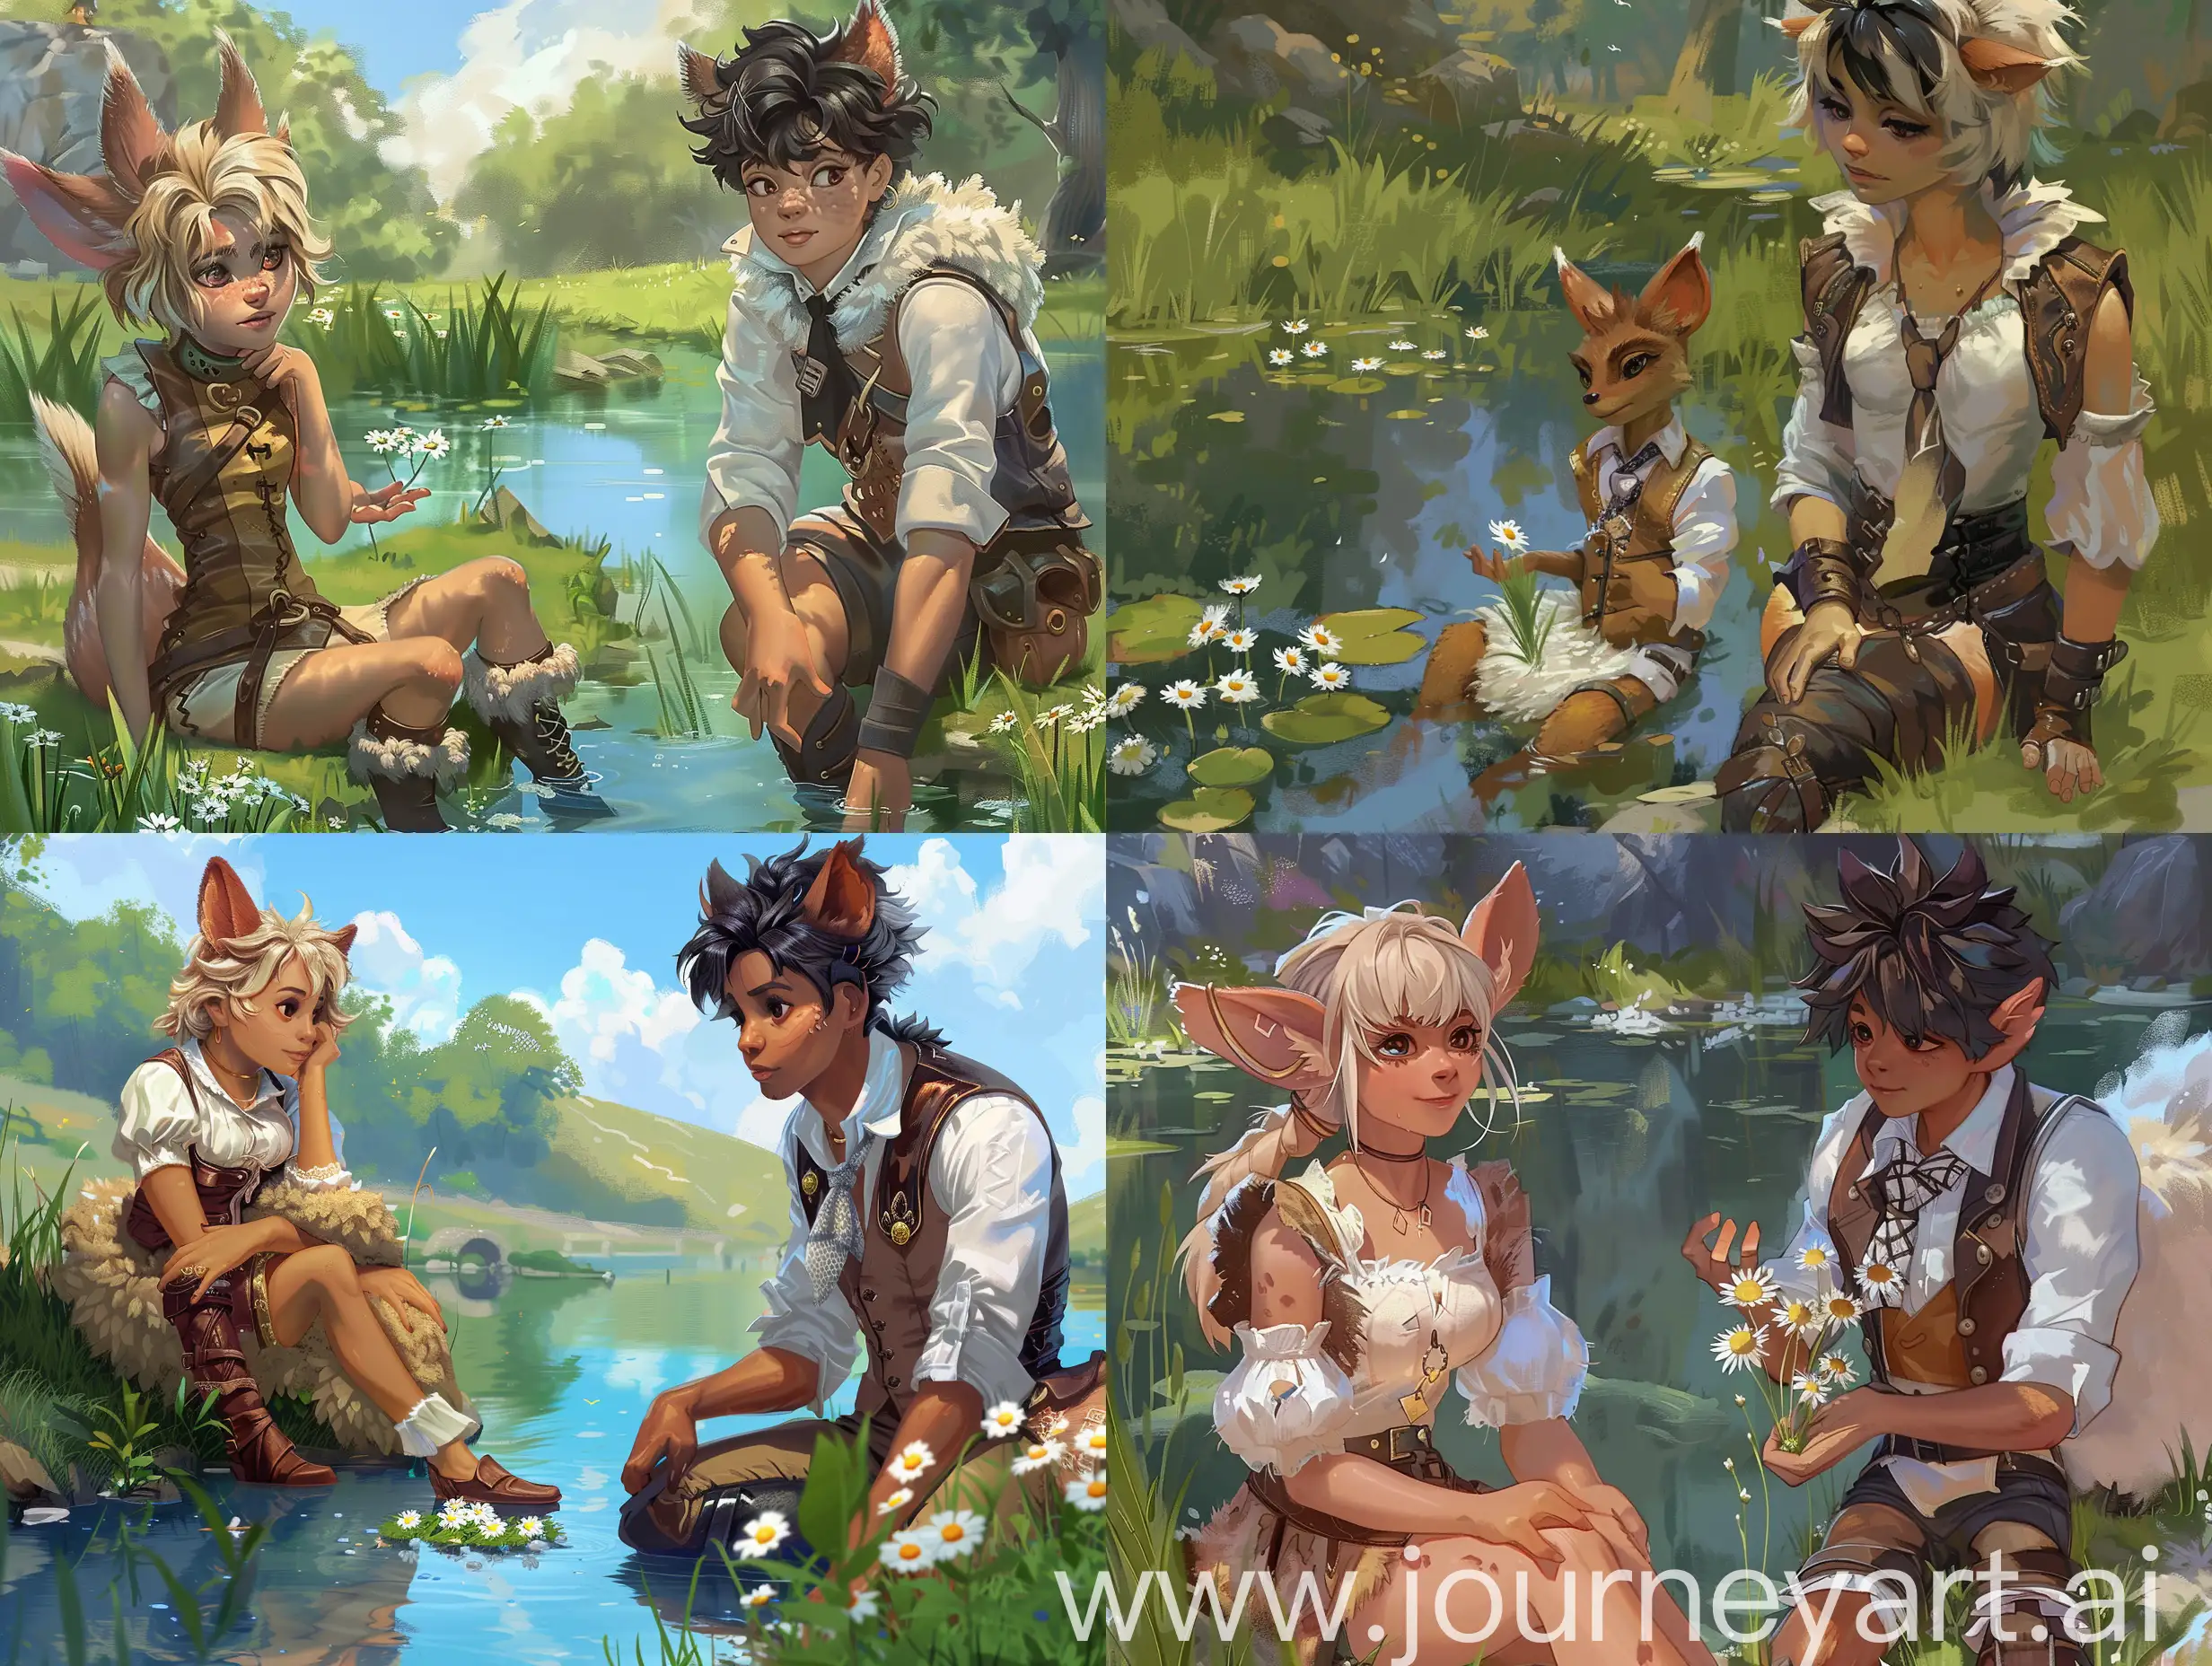 Young-Coco-Bandicoot-in-Shepherdess-Costume-Receives-Daisies-by-Pond